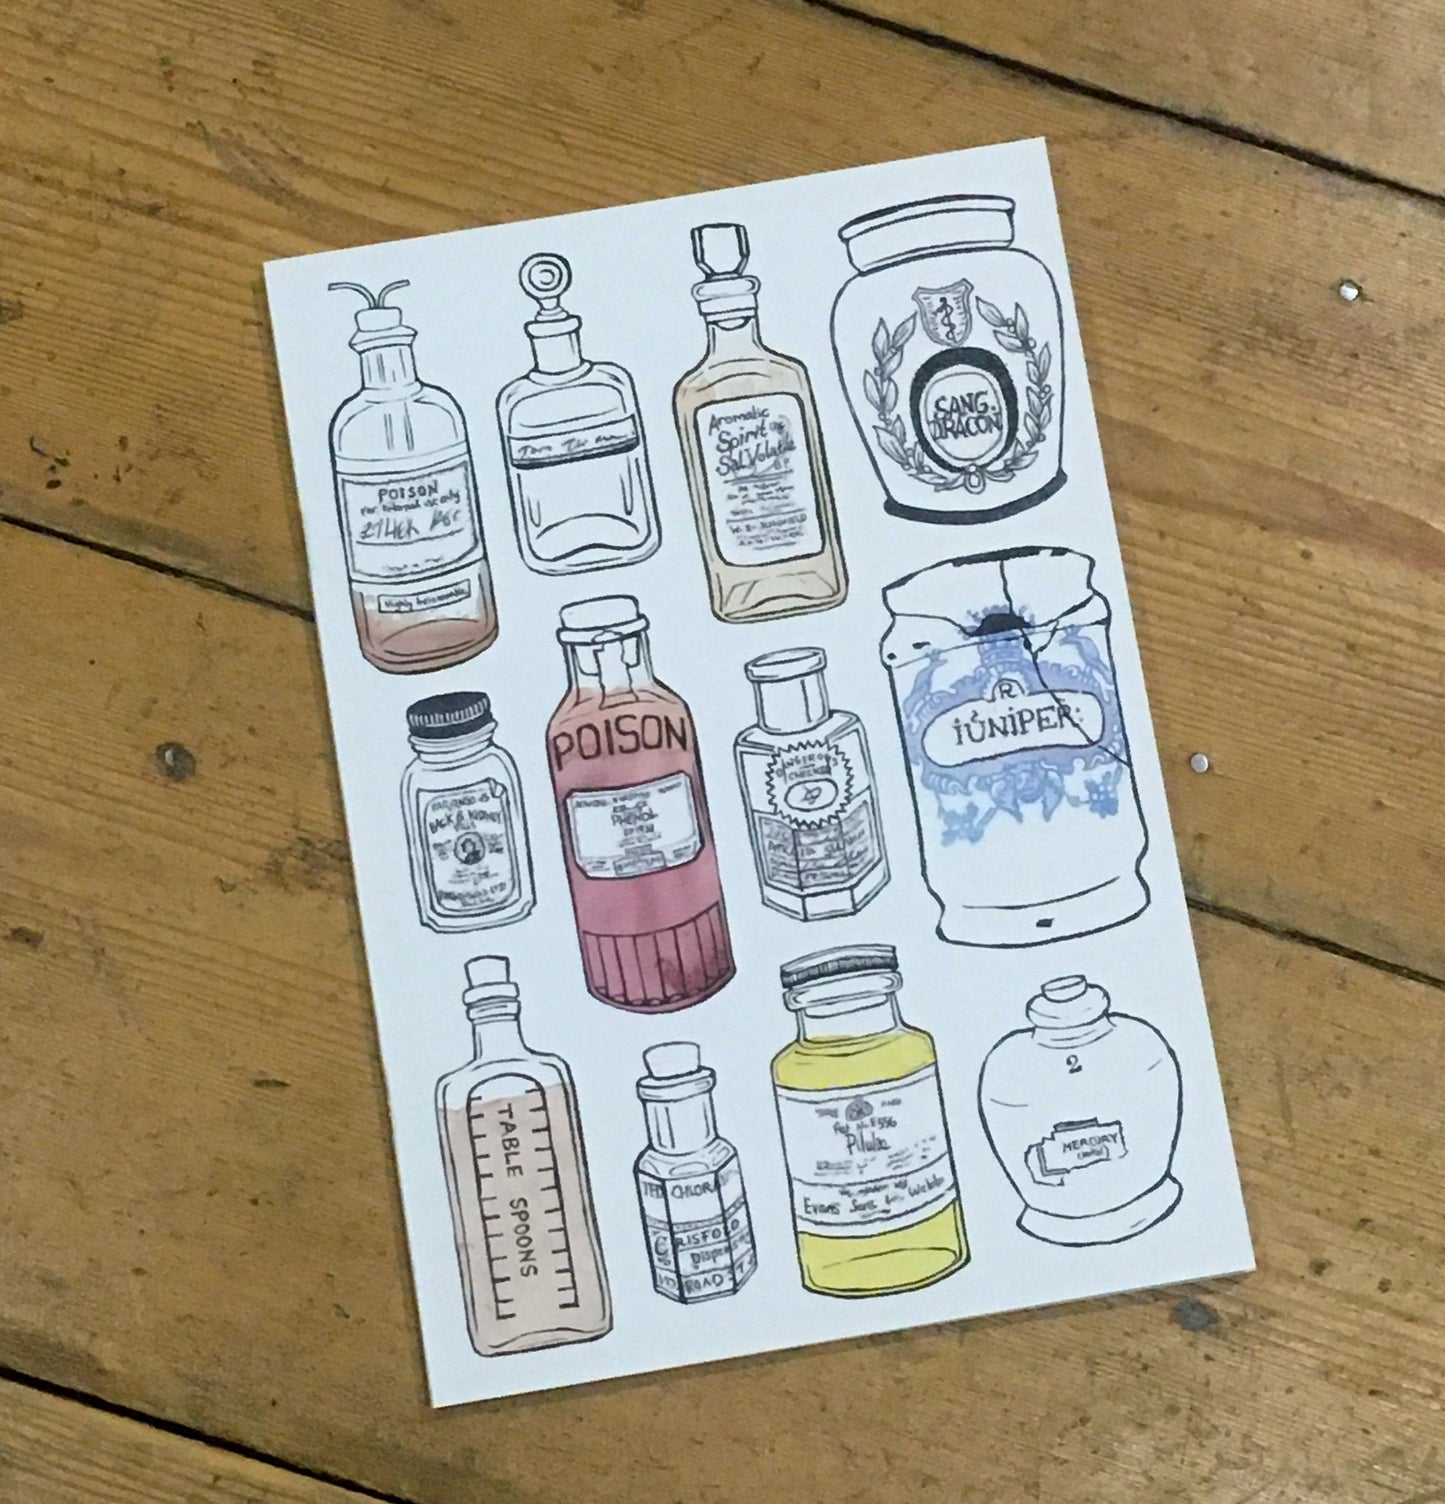 A5 notebook, off-white colour, with lino printed apothecary bottles on cover.